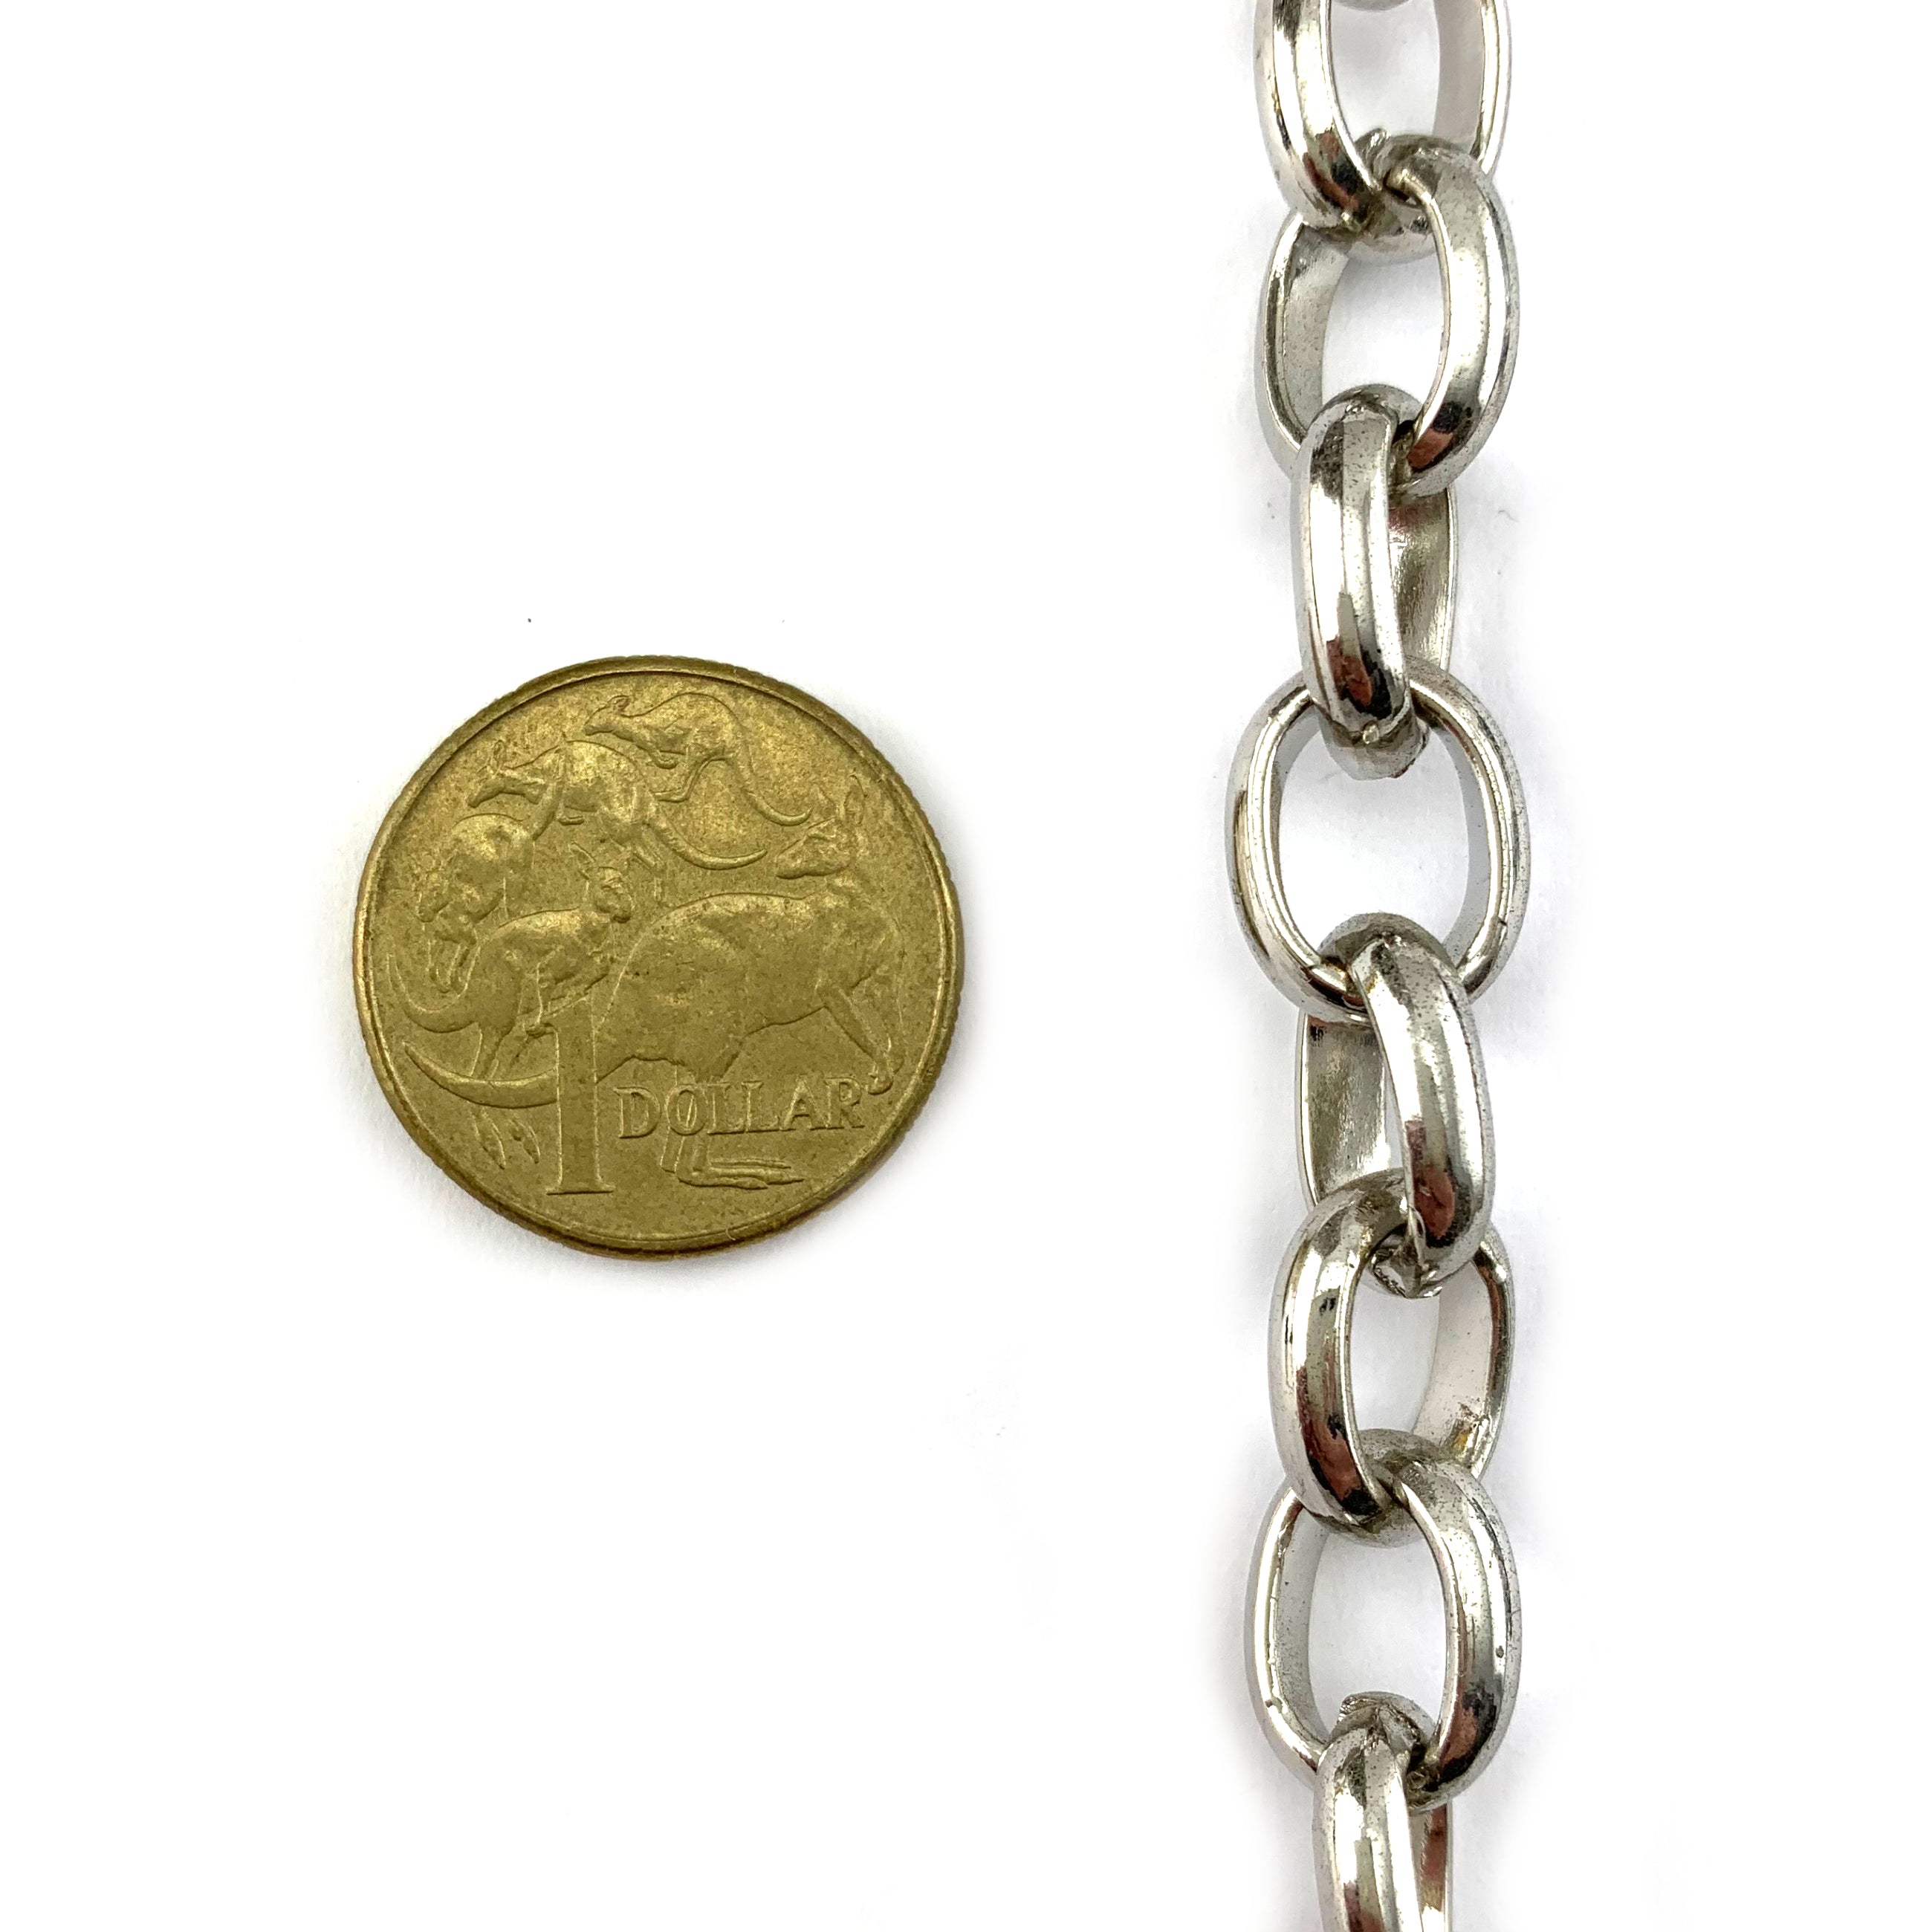 Chrome-plated box chain, size: 4mm. Order by the metre. Australia wide delivery.